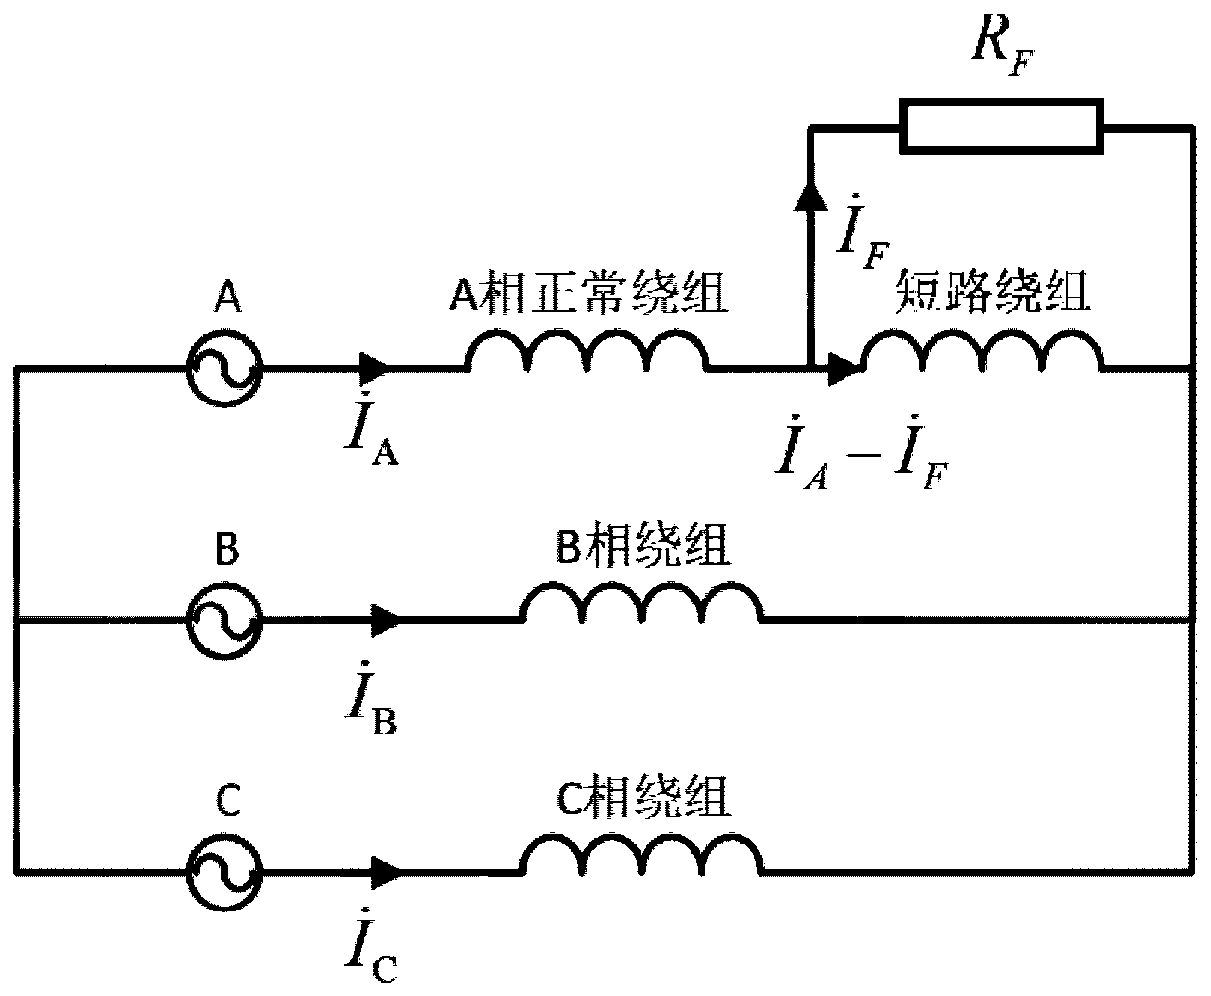 Fault Diagnosis Method of Turn-to-turn Short Circuit of Permanent Magnet Synchronous Motor Based on Magnetic Field Distribution Monitoring